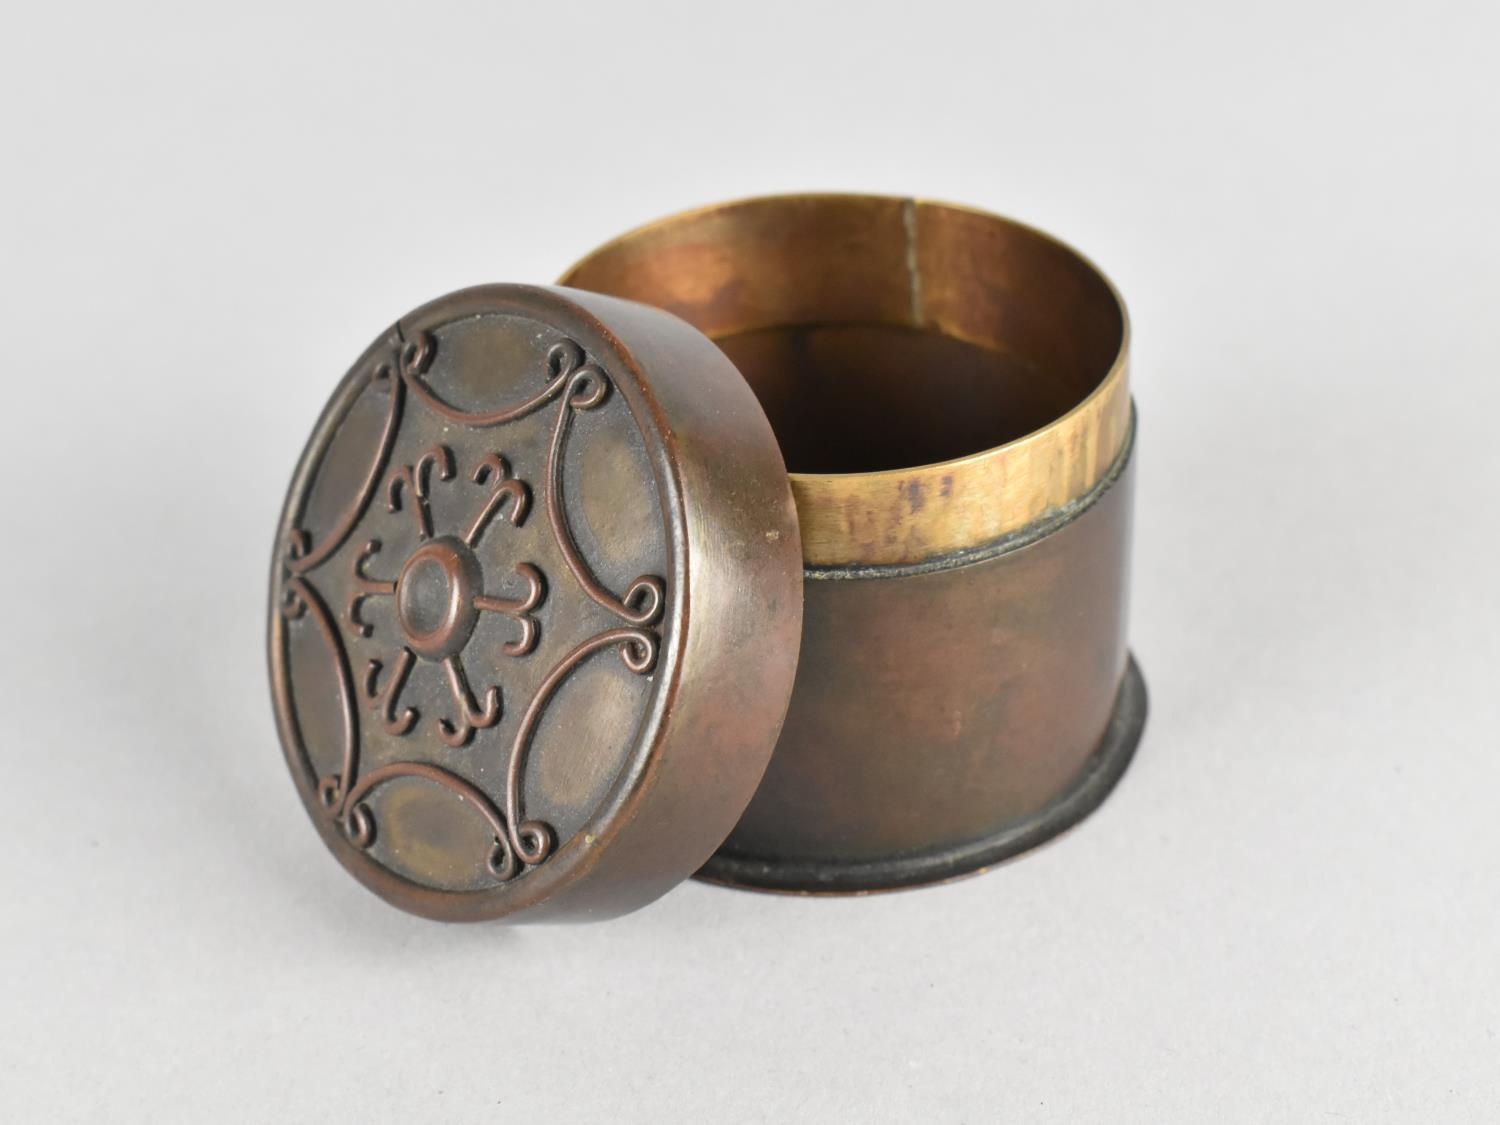 A Small Bronze Circular Trinket Box, the Lid with Relief Fleur De Lys Motif, 4cms High - Image 3 of 4